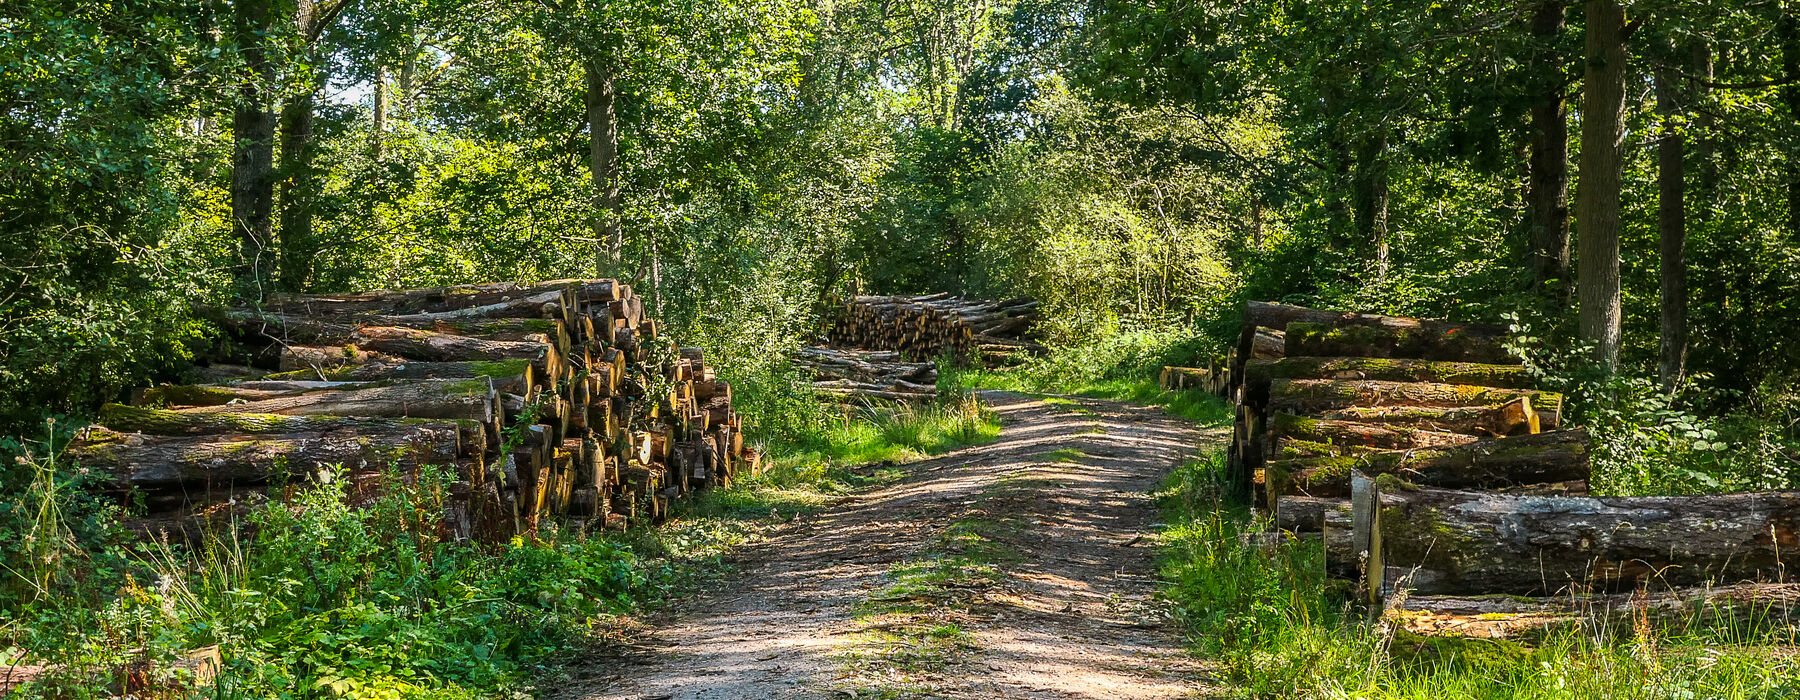 Stacked timber beside forest road at the Straits Enclosure, Alice Holt Forest, Hampshire, England.